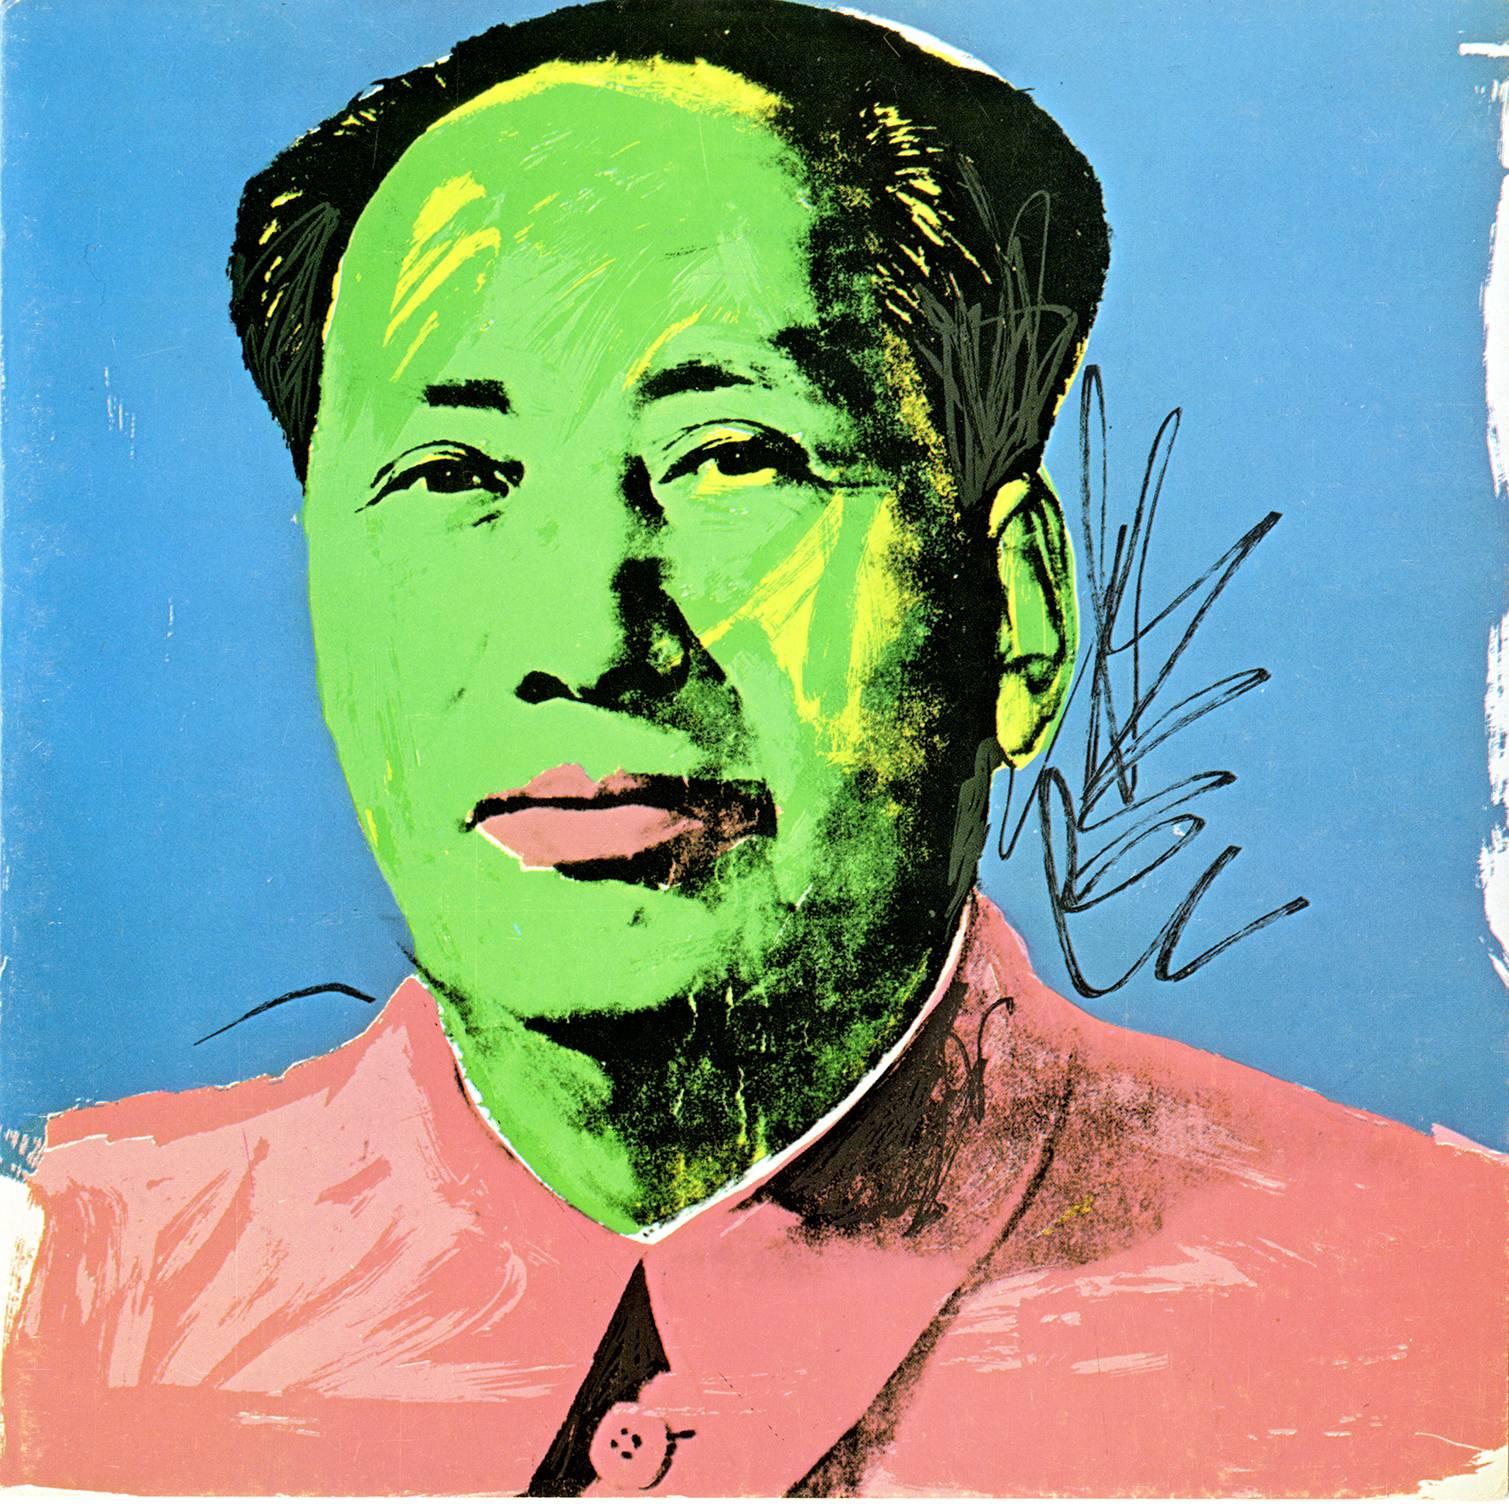 Andy Warhol Leo Castelli Gallery 1972: 
Leo Castelli gallery released this colorful, highly collectible 1970s Andy Warhol Mao announcement card in 1972 to promote Andy Warhol’s soon-to-be-released portfolio of ten screen-prints of the iconic Chinese